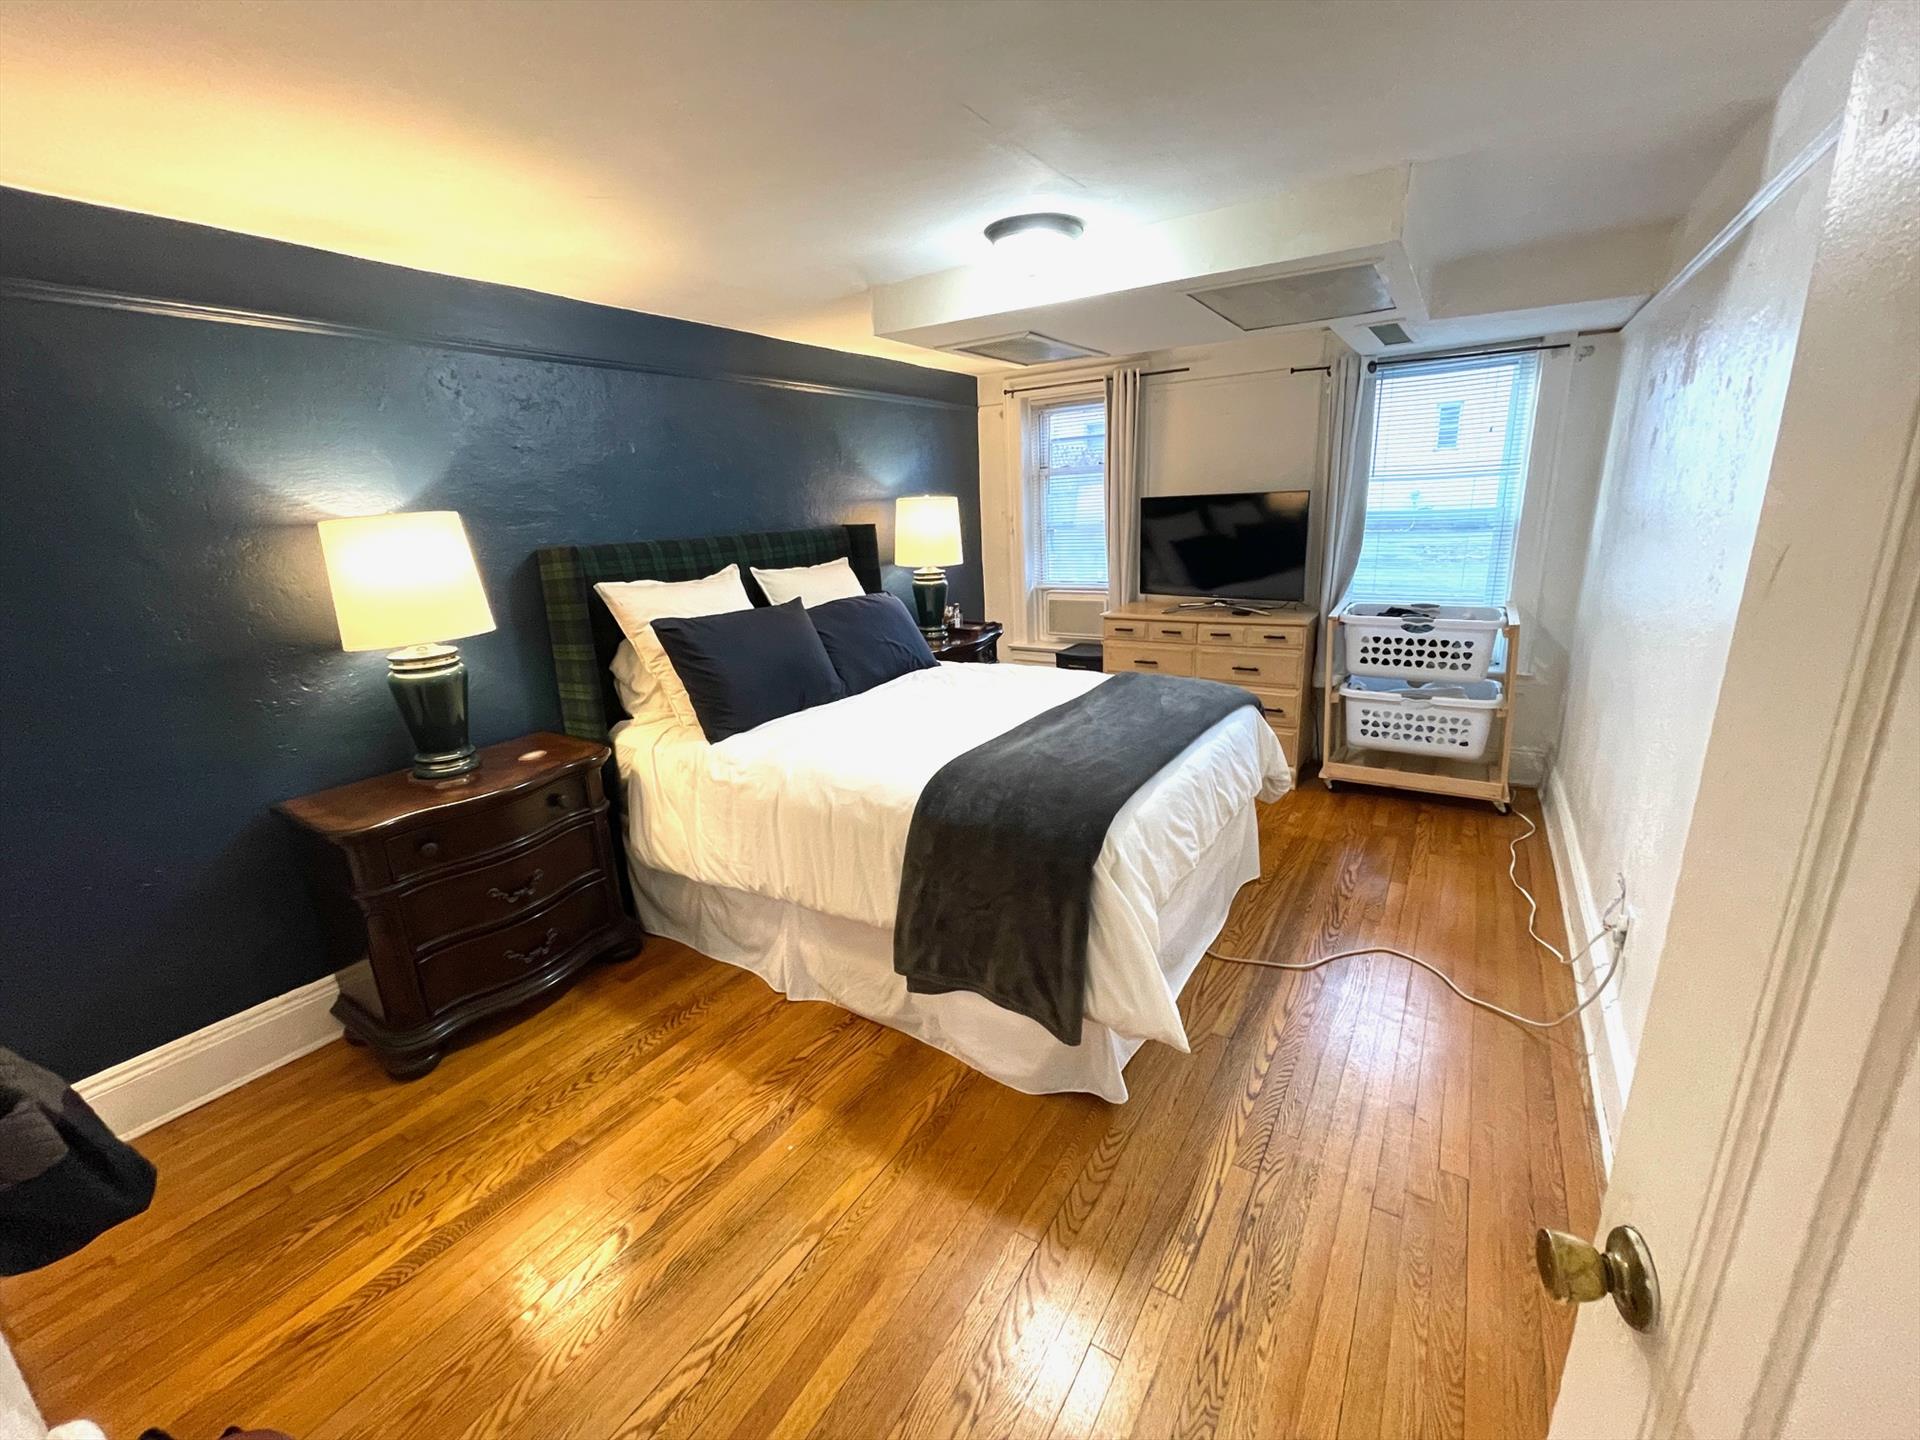 Amazing 2 bed 1 bath unit in the heart of Hoboken! This ground level unit features nice sized bedrooms, hardwood floors, and the perfect central location! Close to shops, restaurants, parks, path, bus, and more. Available 4/1/24. Tenant pays broker fee. Laundry one block away.